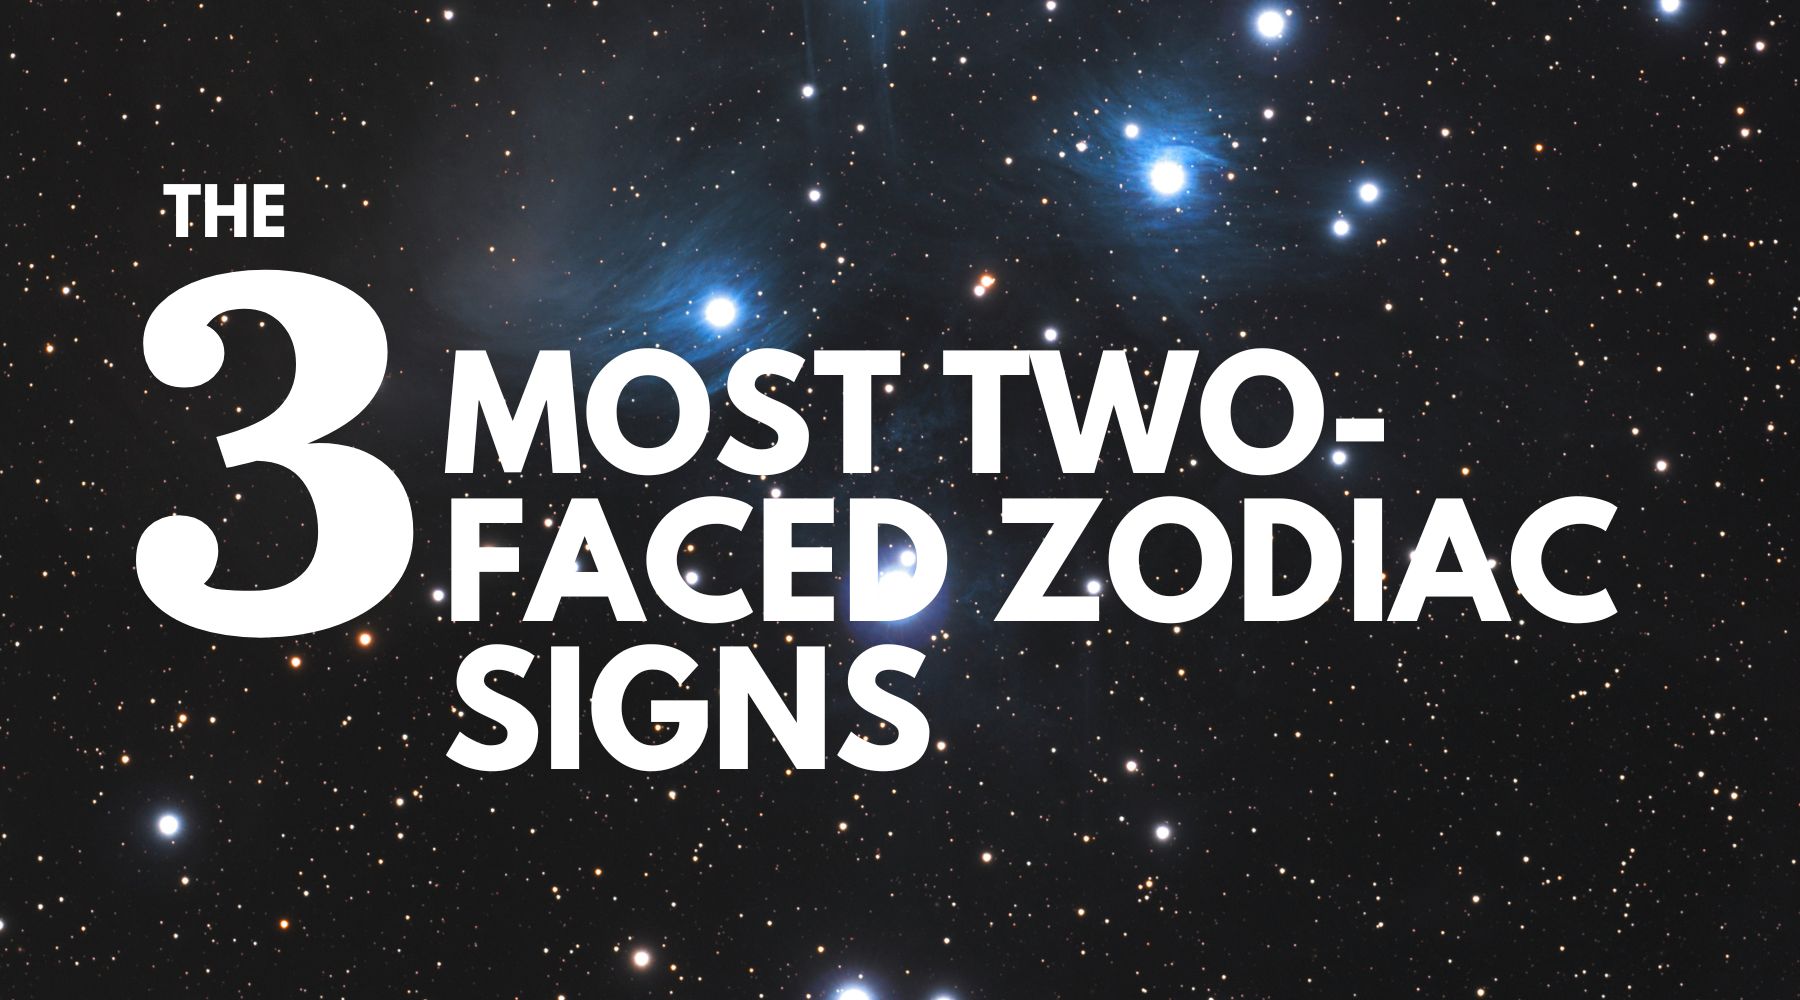 The 3 most two-faced zodiac signs-They will find drama in 2023